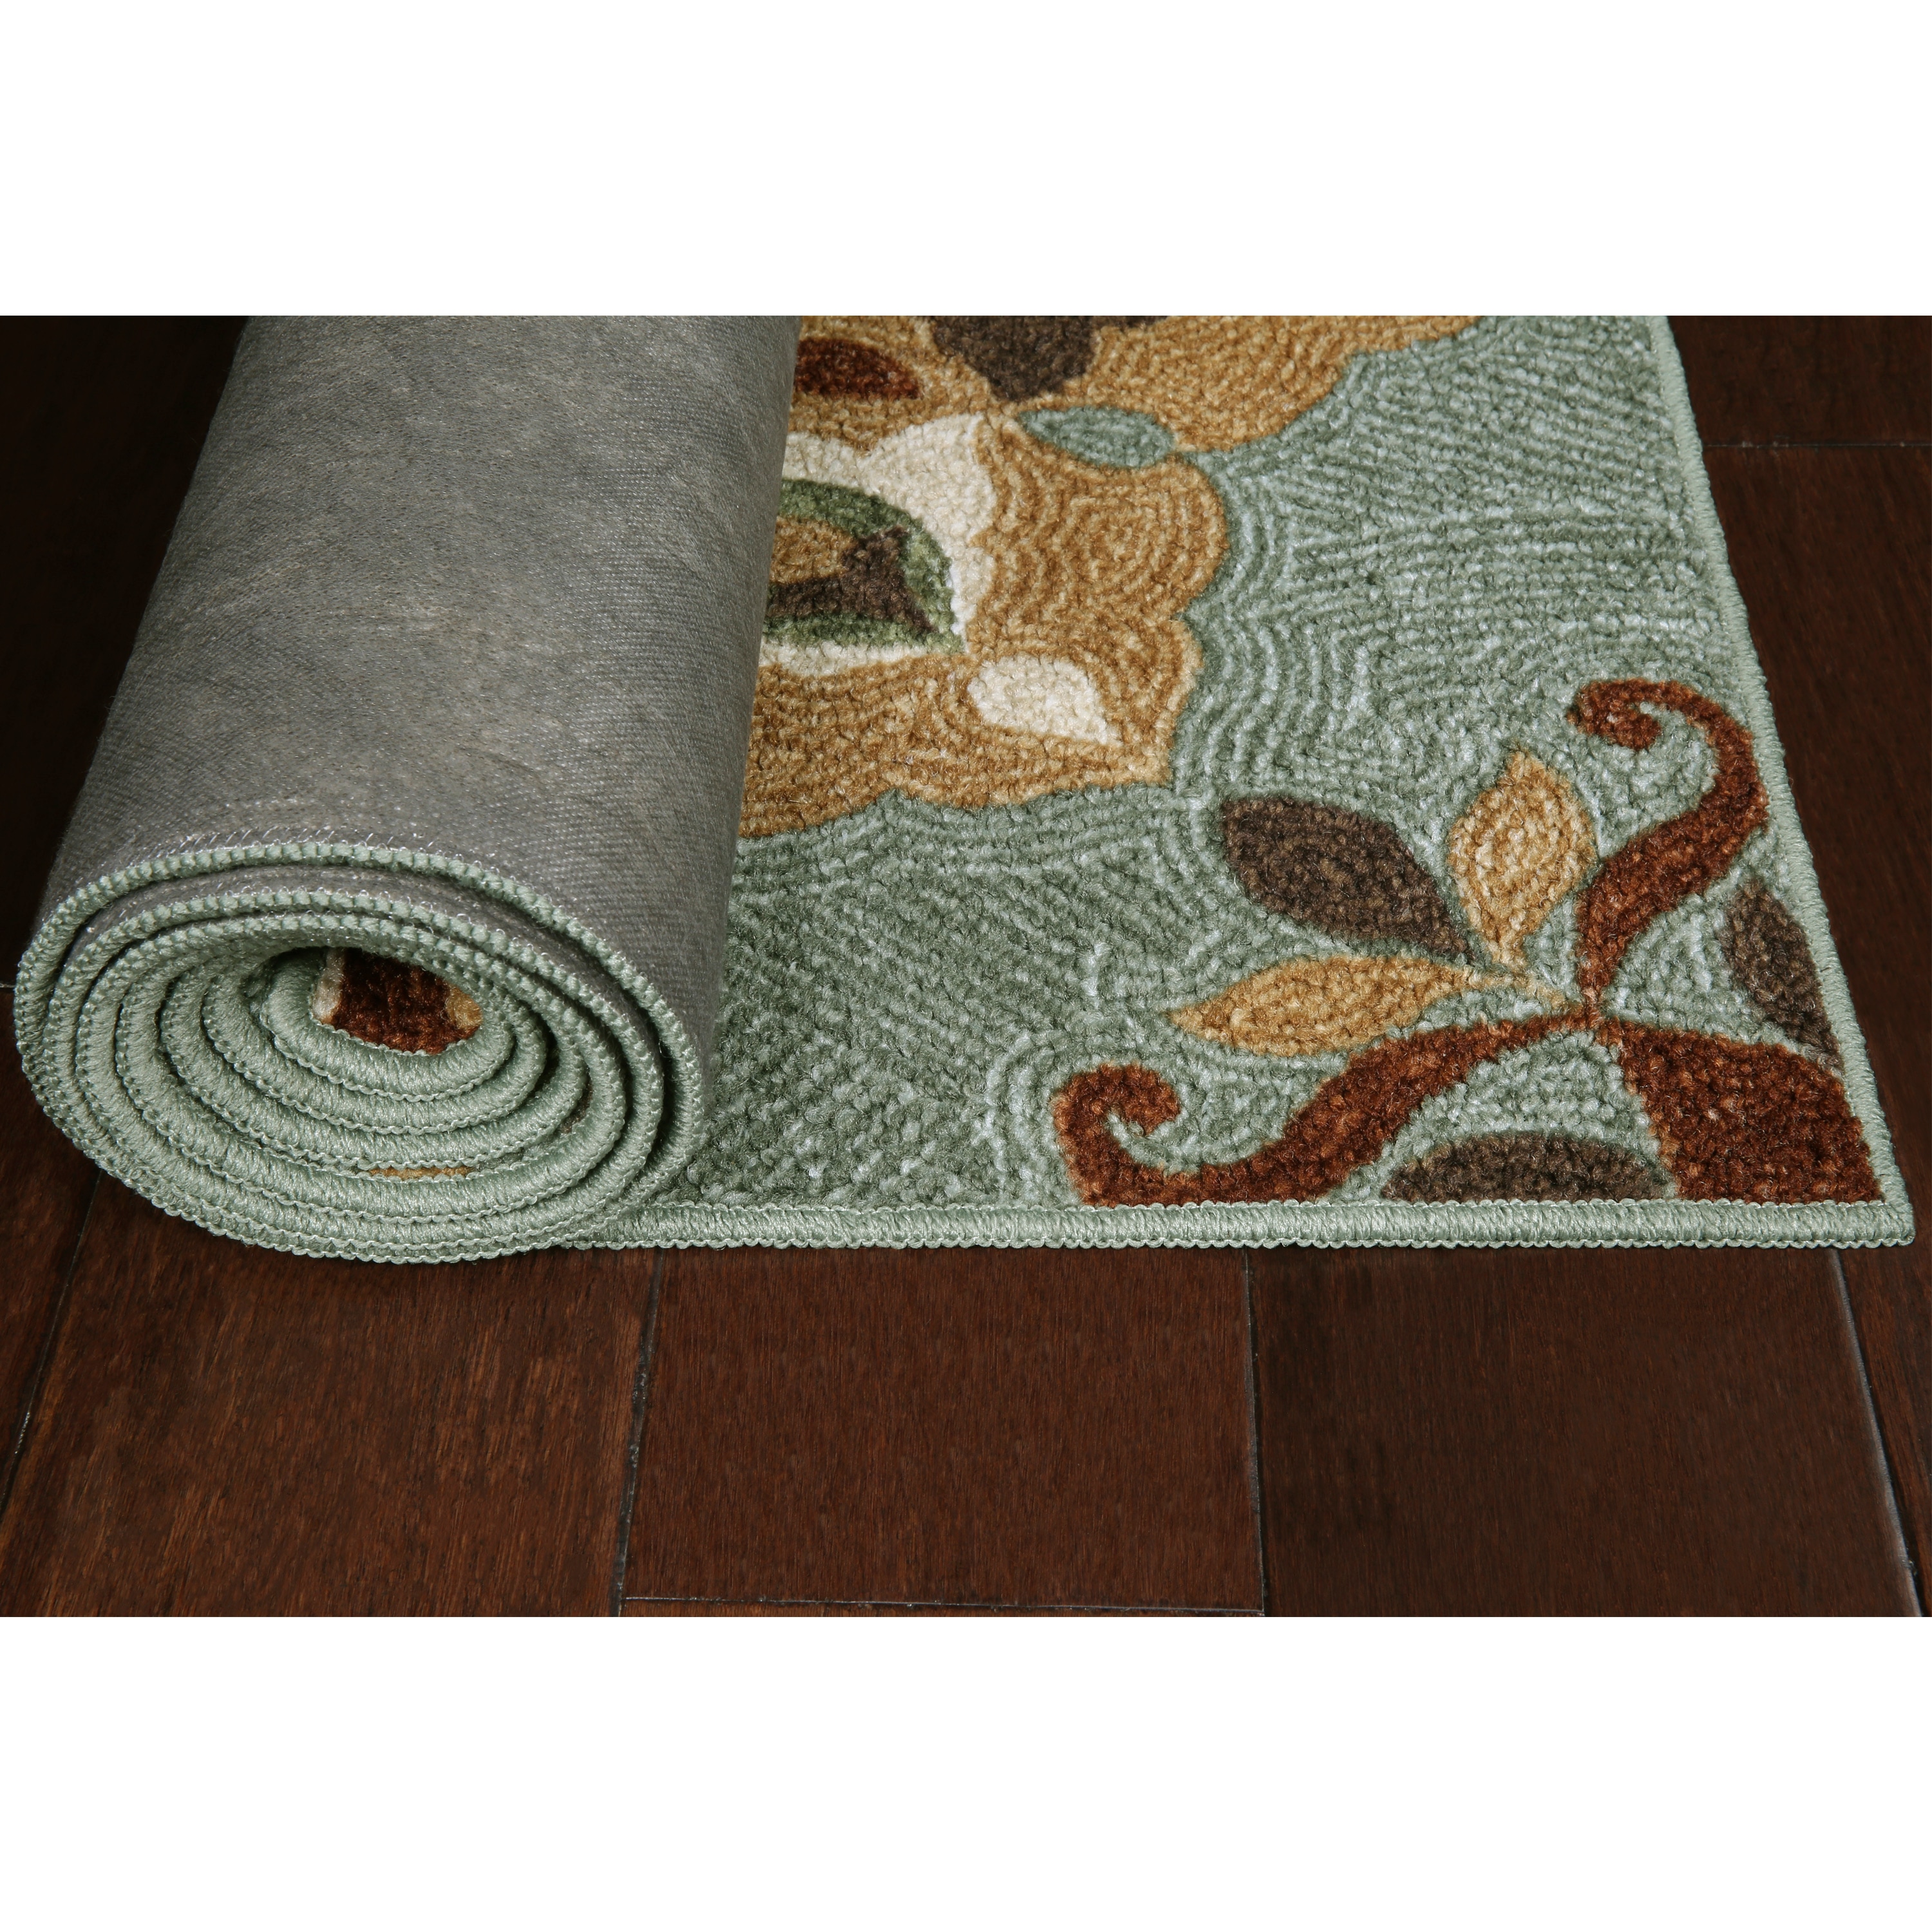 Plow & Hearth My Mat Dirt Trapping Mud Rug, 19 inch x 29 inch - Coffee, Size: 19 x 29, Brown